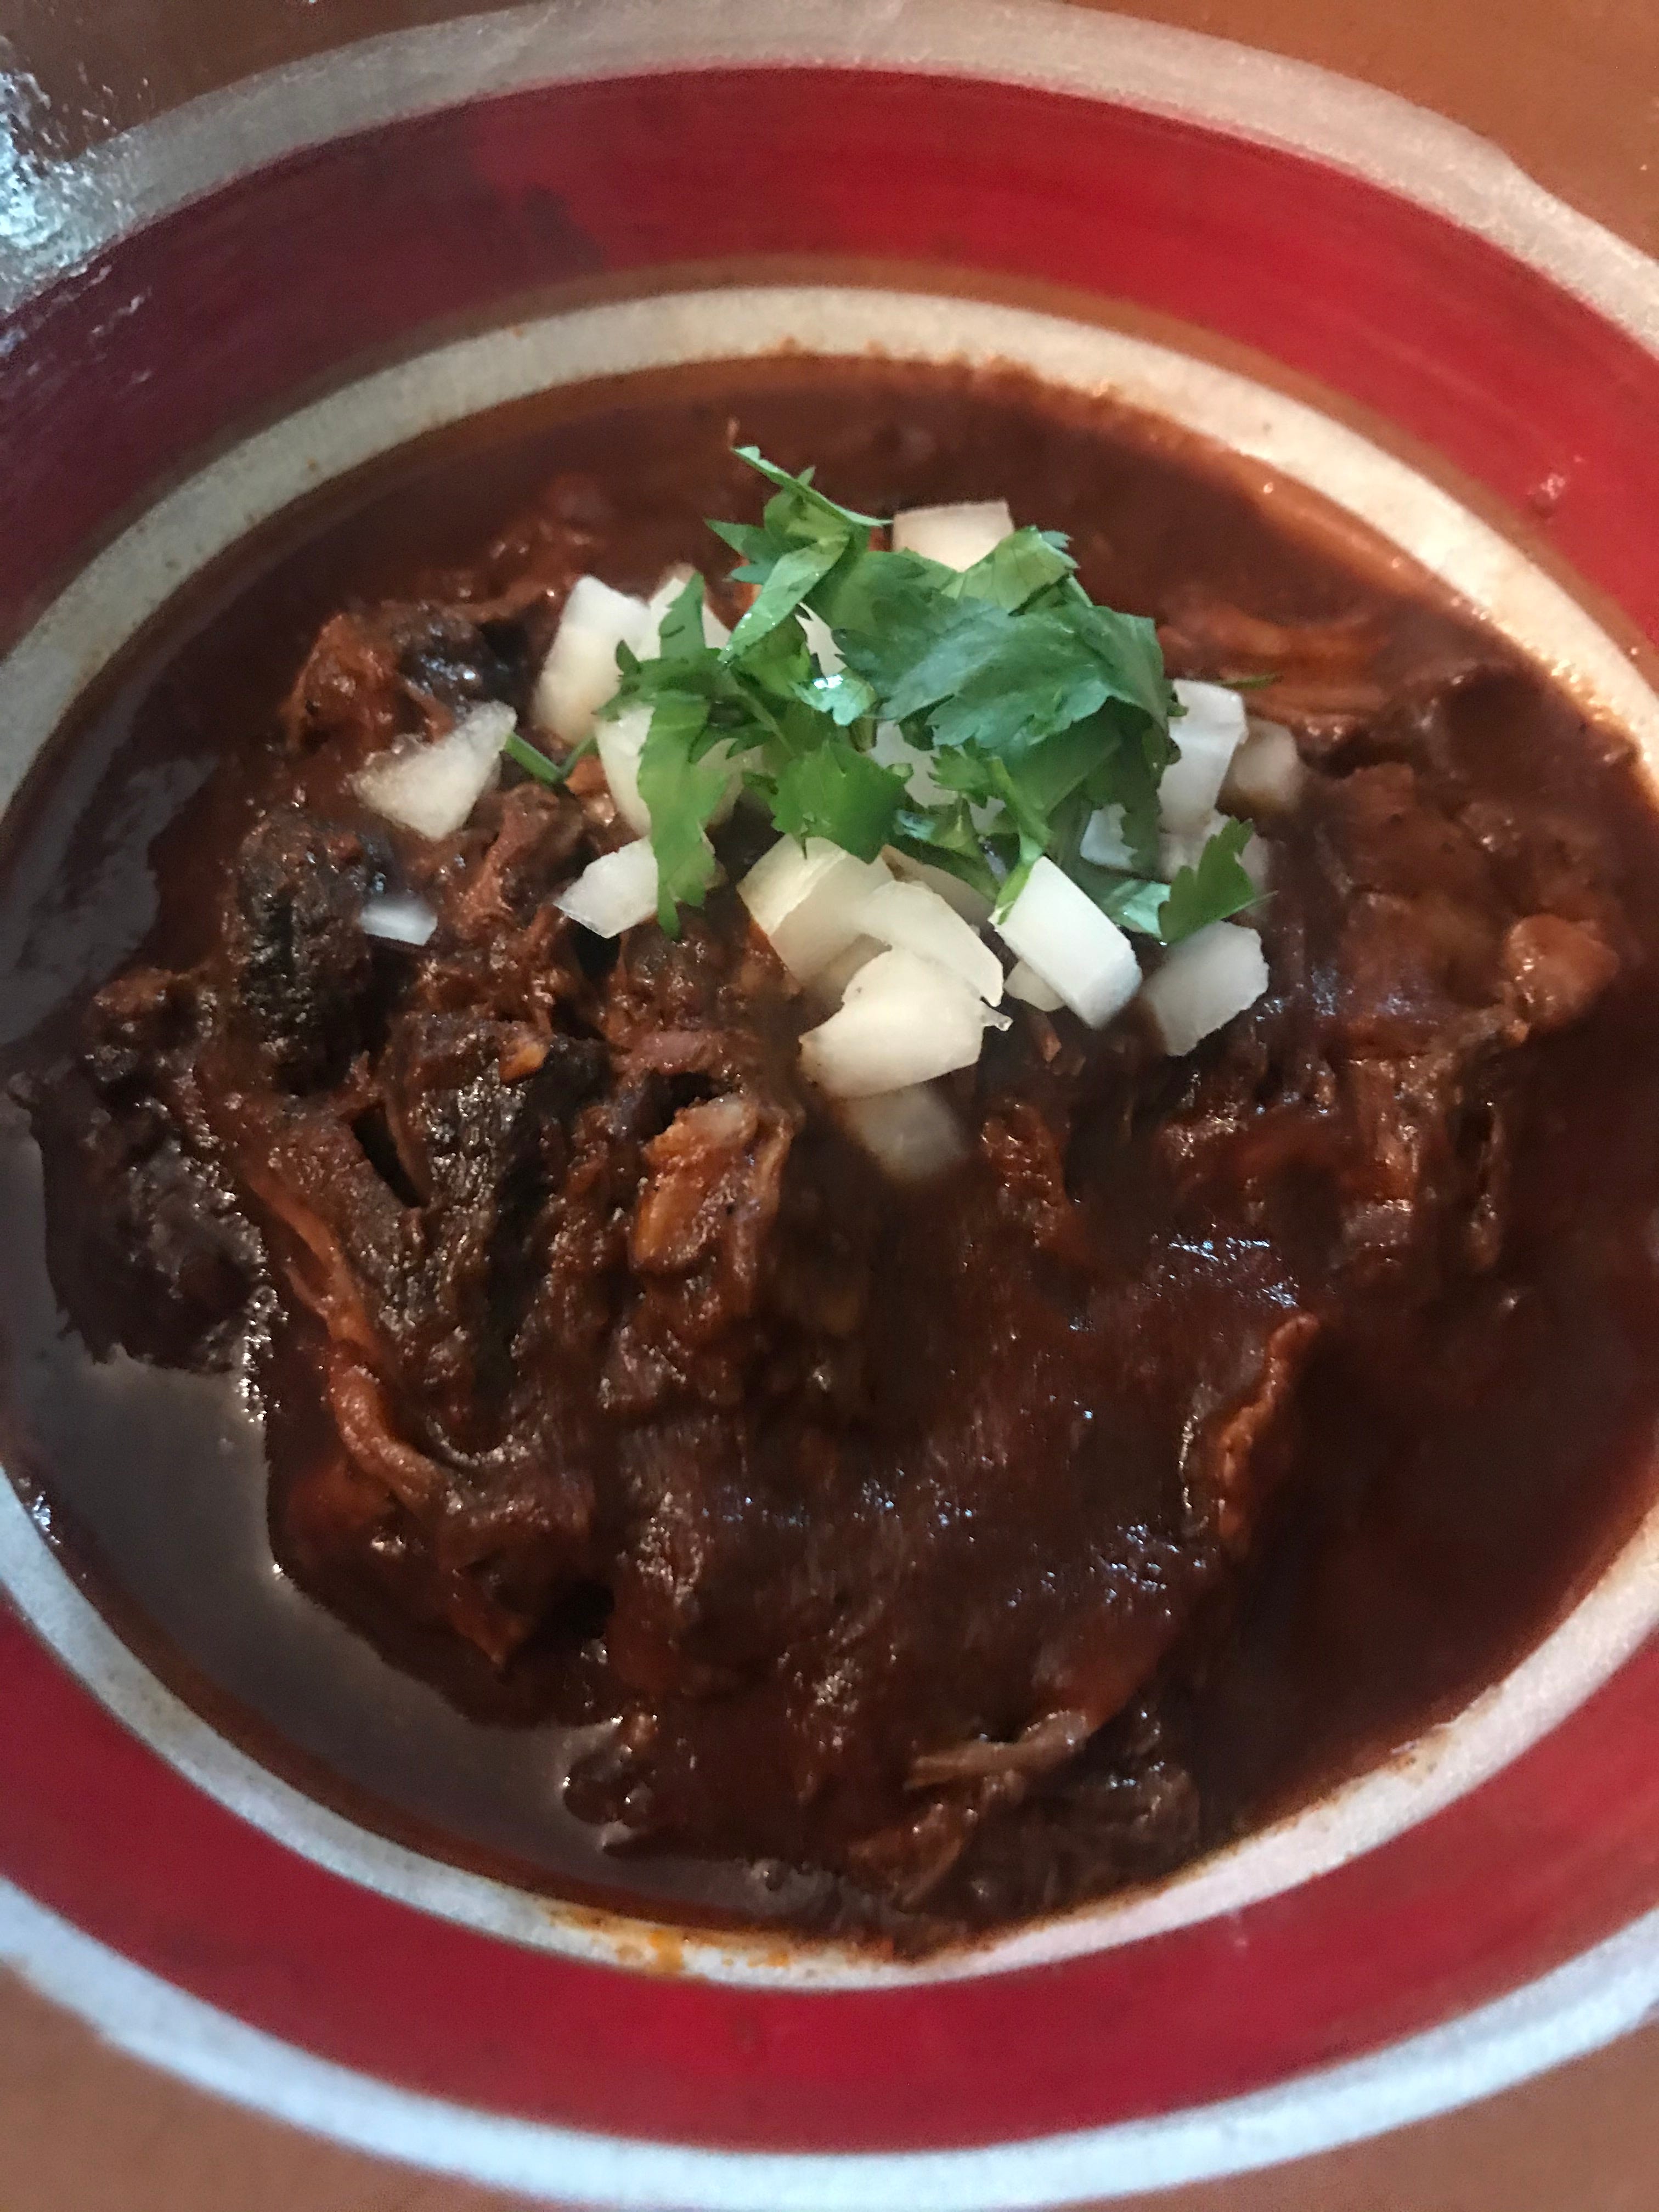 Beef birria recipe: Start preparing this the day before eating